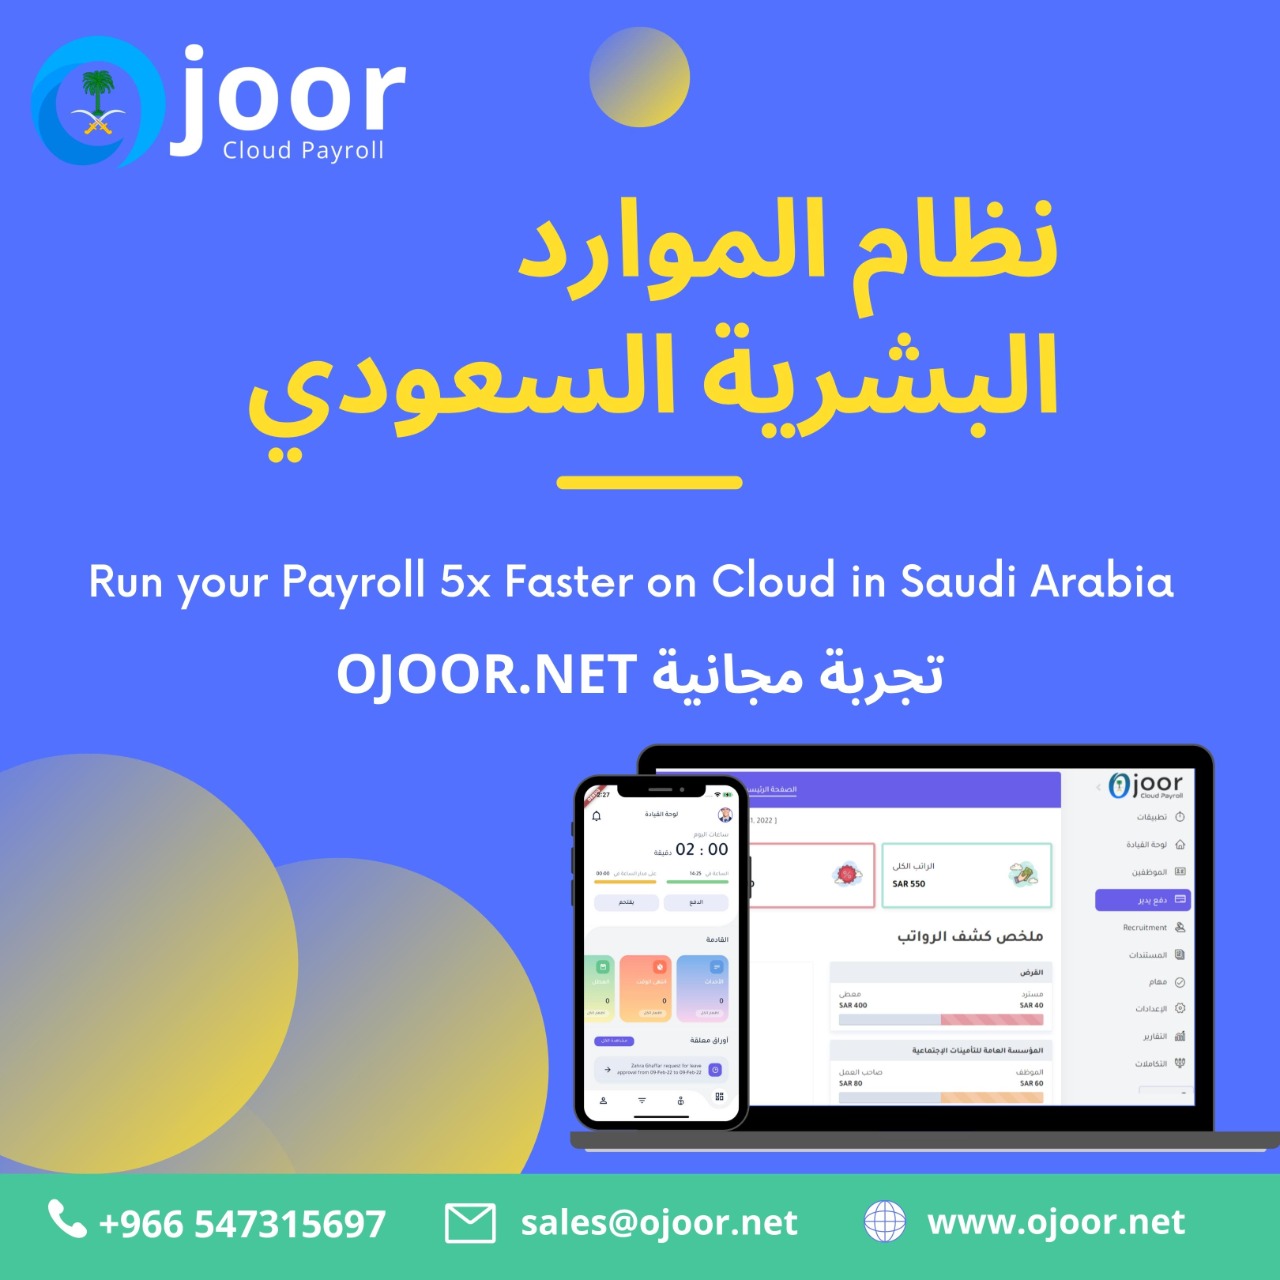 What are the Features of Payroll Software in Saudi?